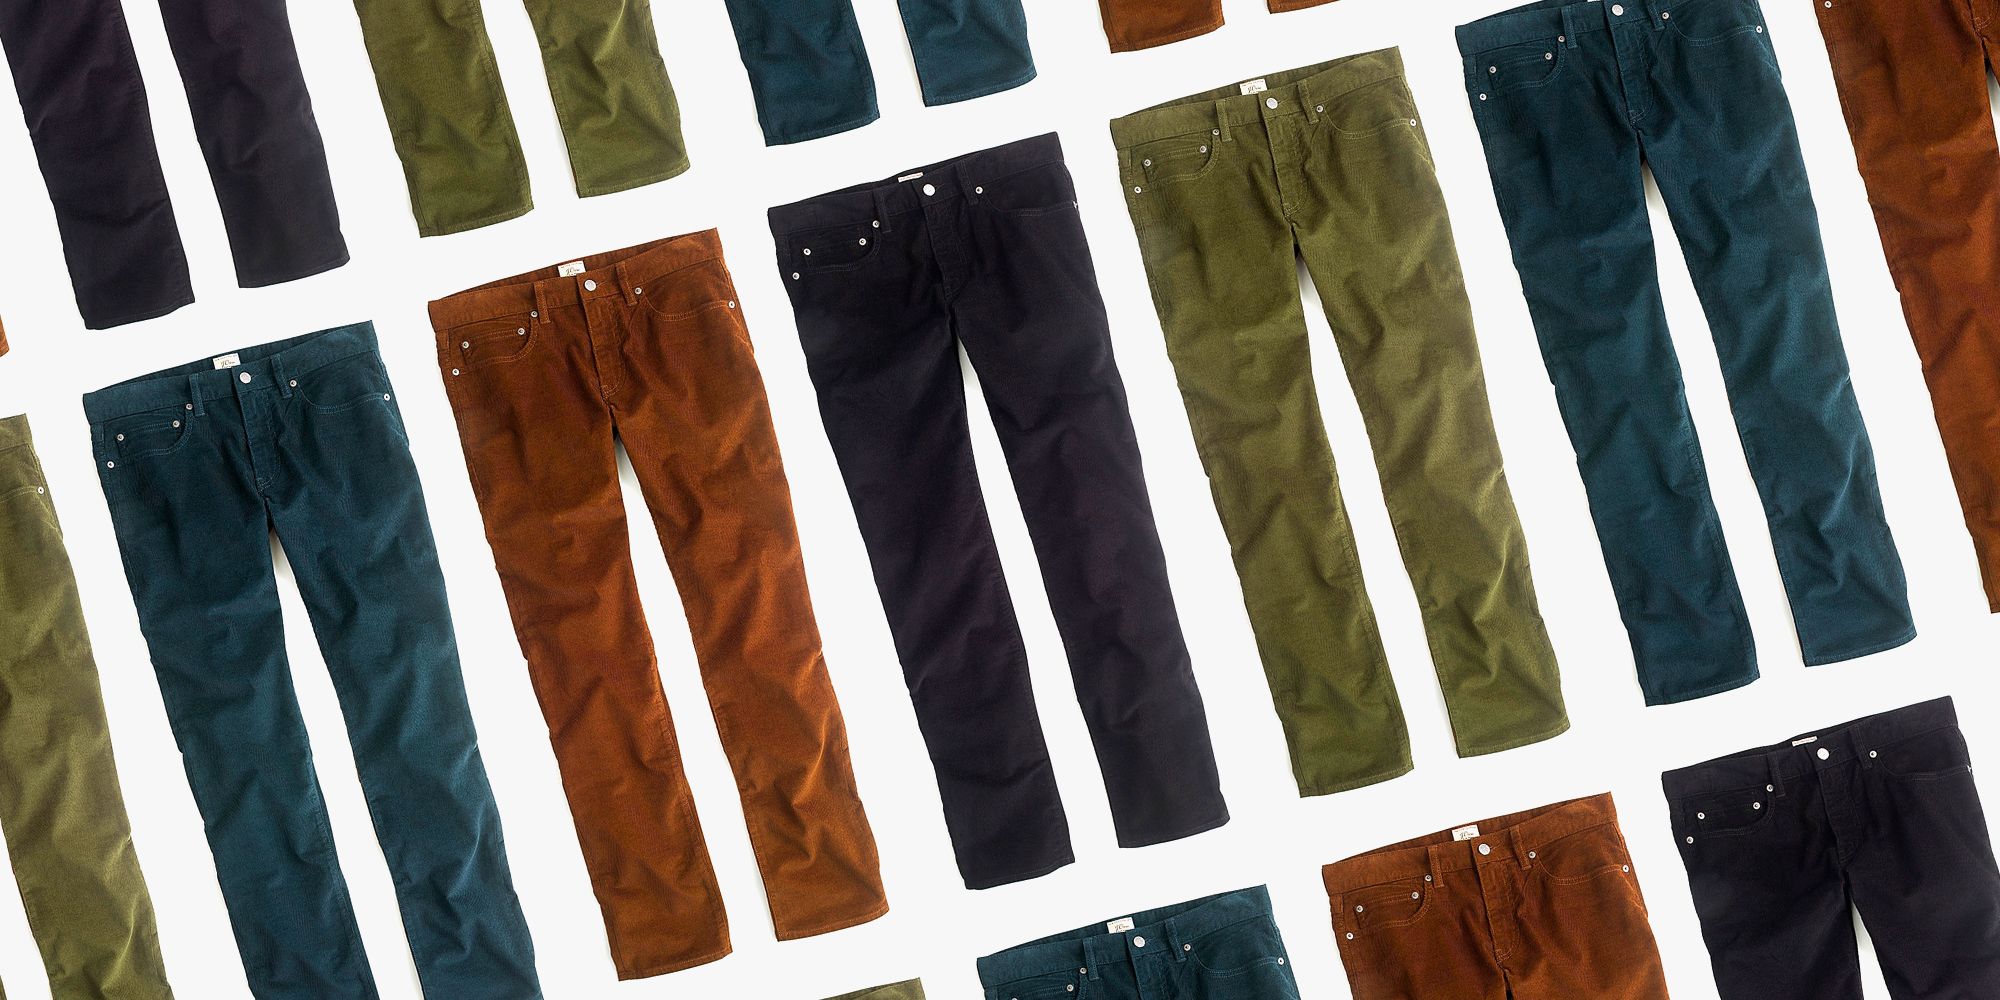 See Now, Buy Now: These Bonobos Corduroy Pants Are Some of the Best Men's  Pants for Fall | The Style Guide